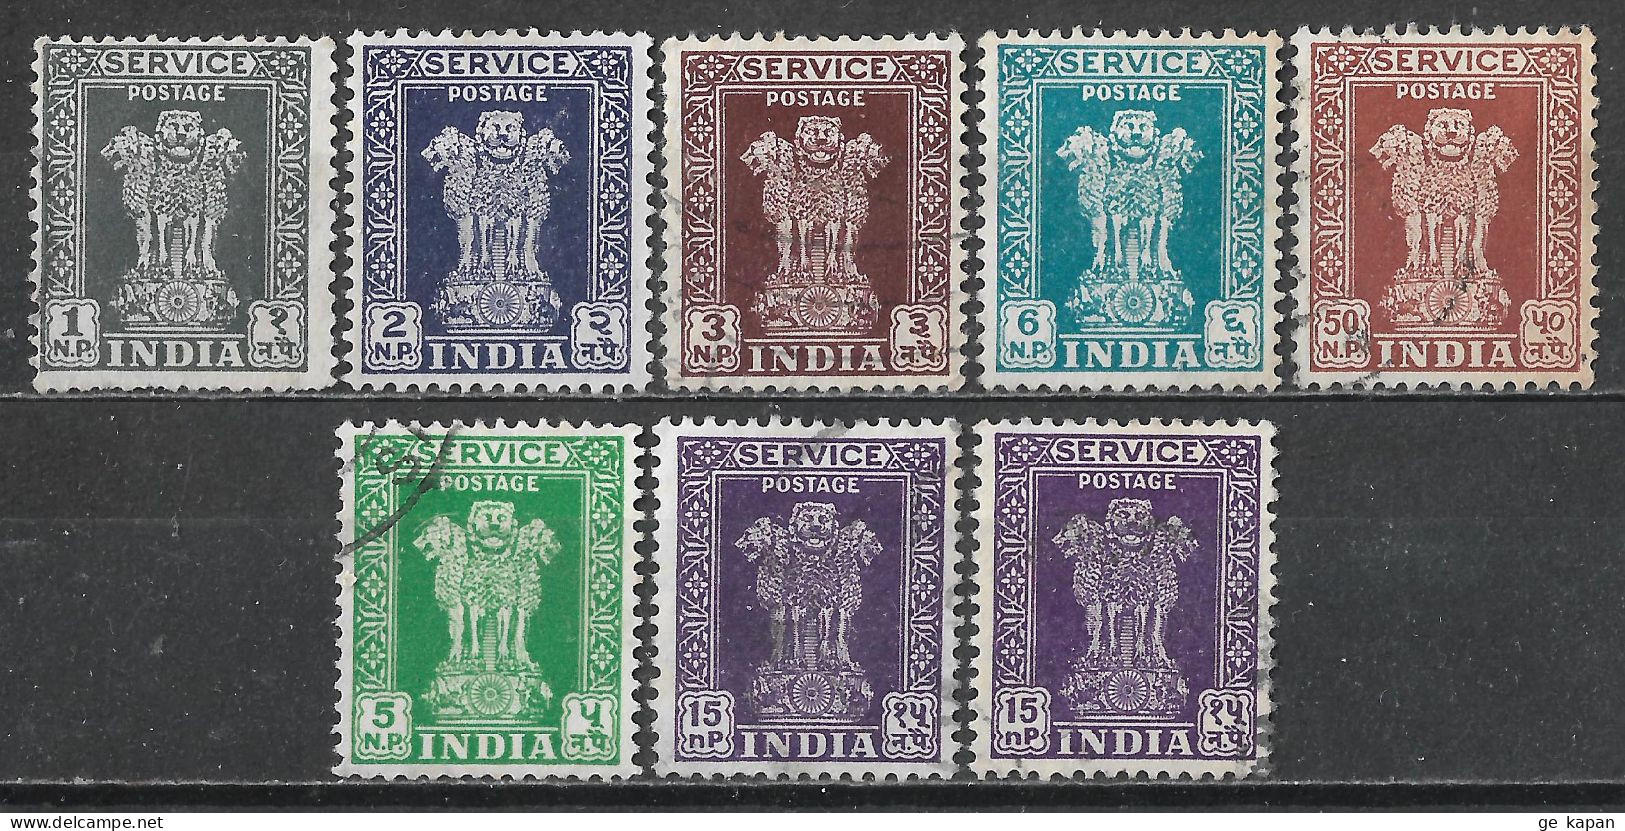 1957,1958 INDIA SET OF 8 OFFICIAL USED STAMPS (Michel # 131-133,135,140,144,148) - Official Stamps